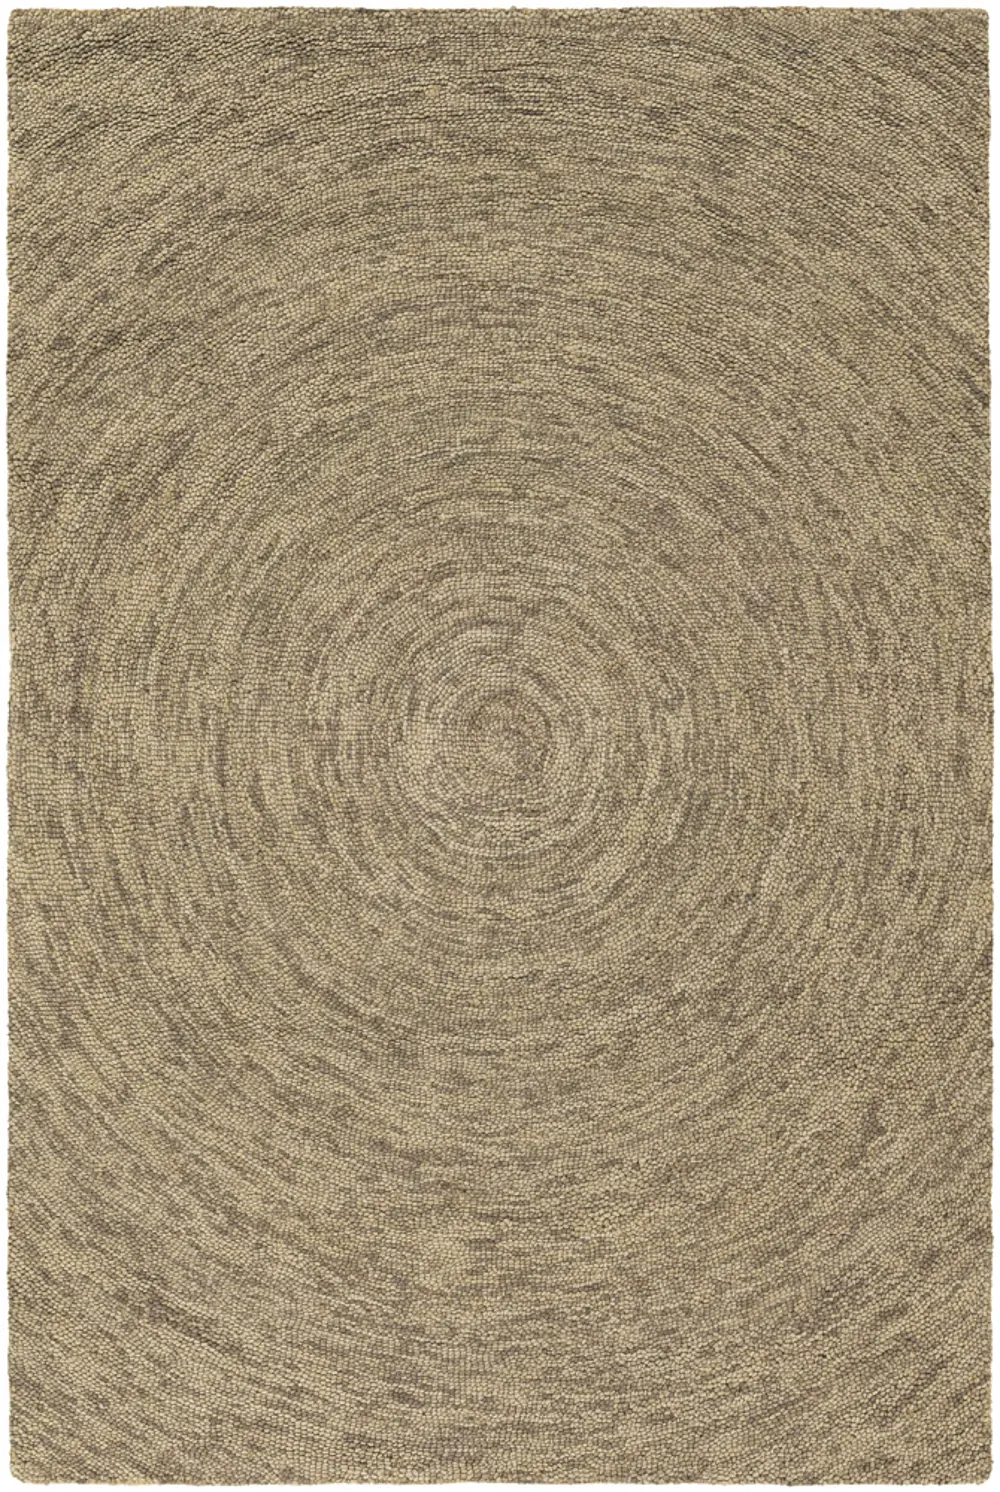 8 x 11 Large Contemporary Beige and Taupe Area Rug - Galaxy-1